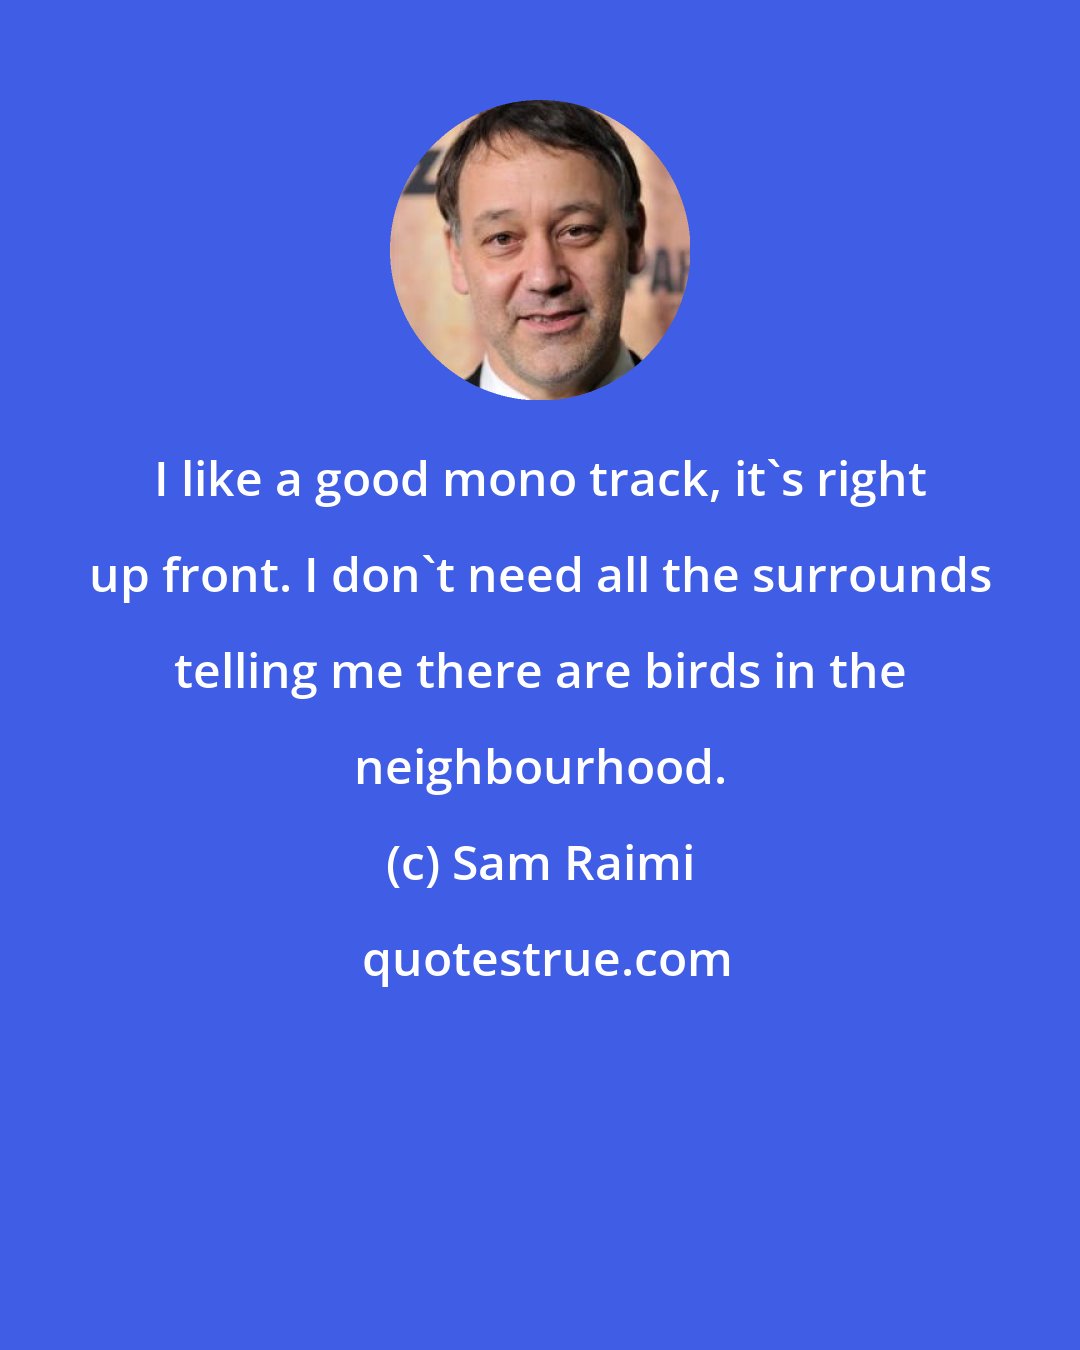 Sam Raimi: I like a good mono track, it's right up front. I don't need all the surrounds telling me there are birds in the neighbourhood.